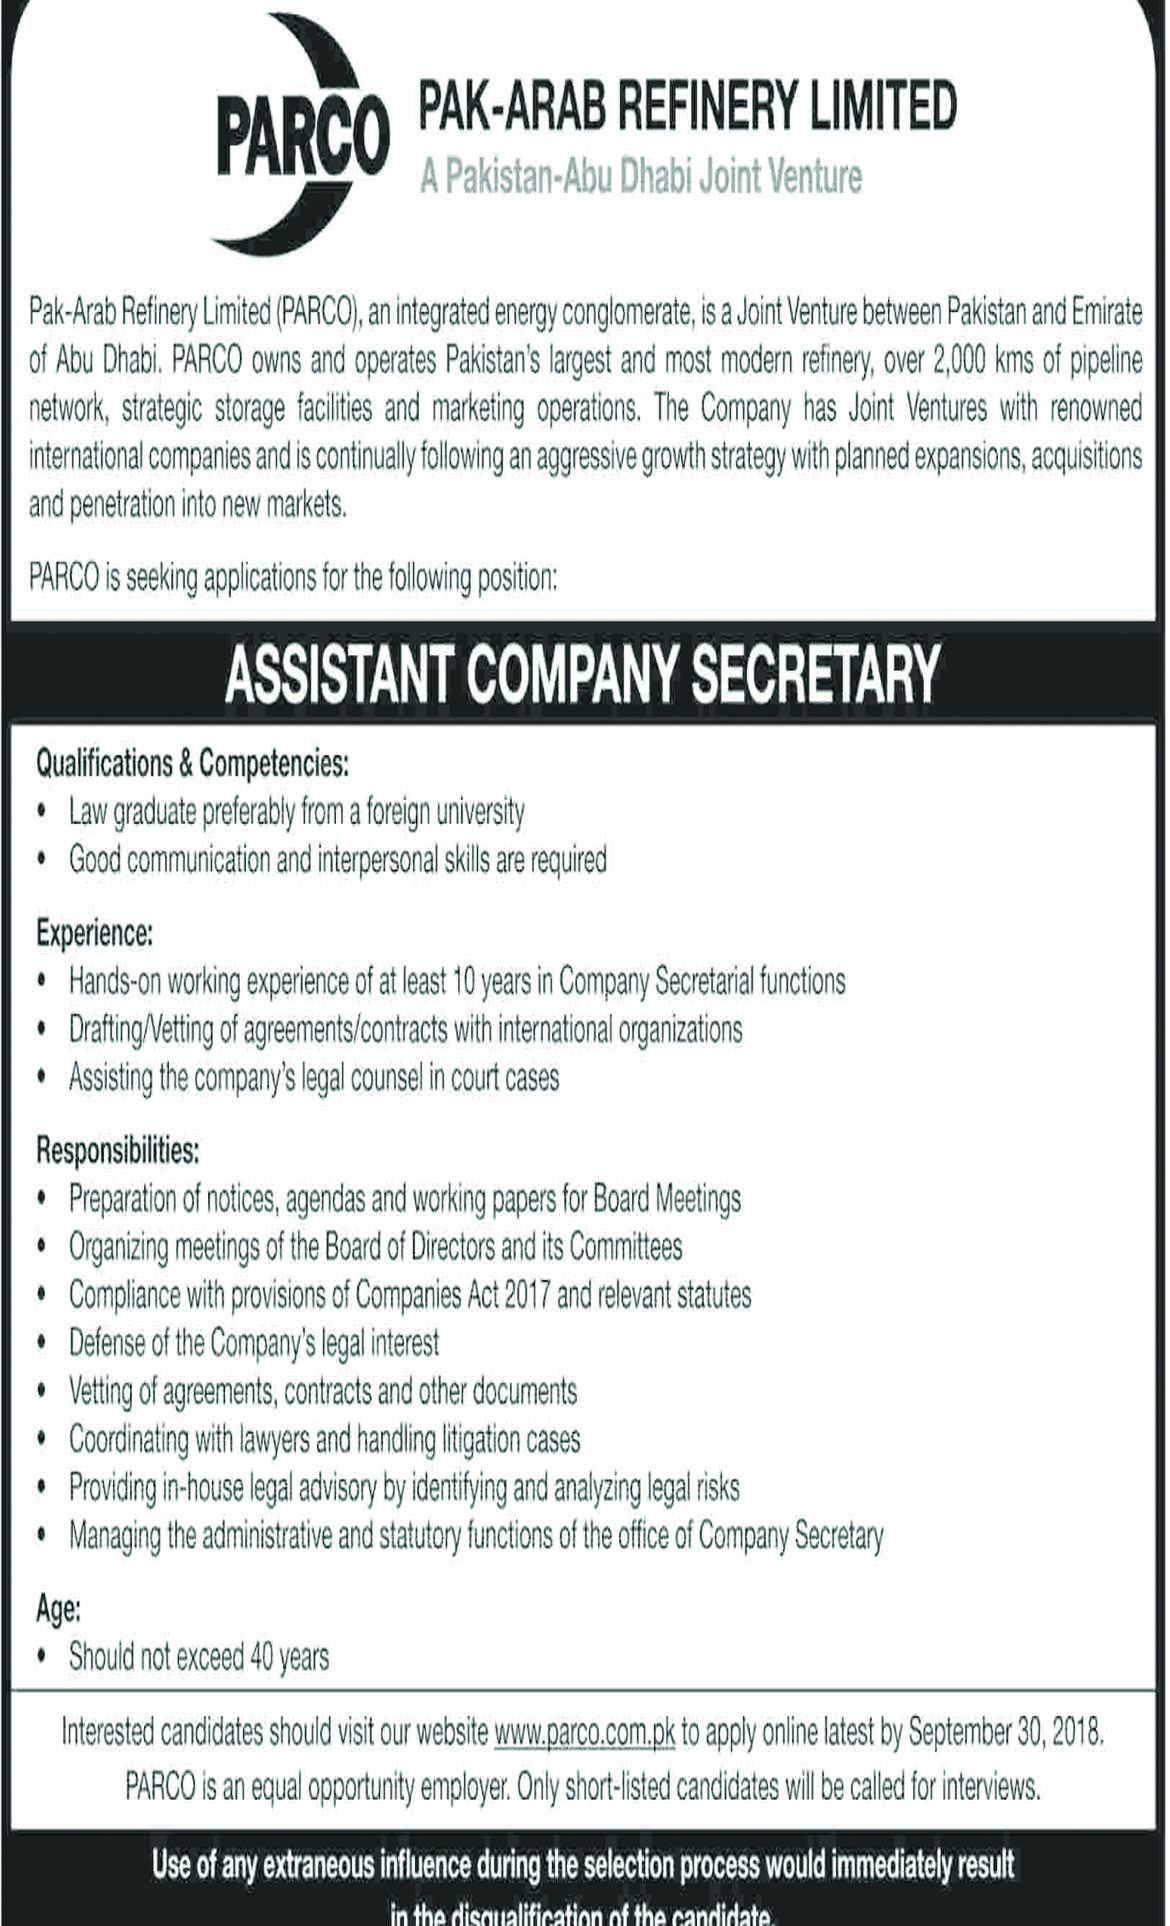 Jobs In Pak Arab Refinery Limited PARCO 17 Sep 2018